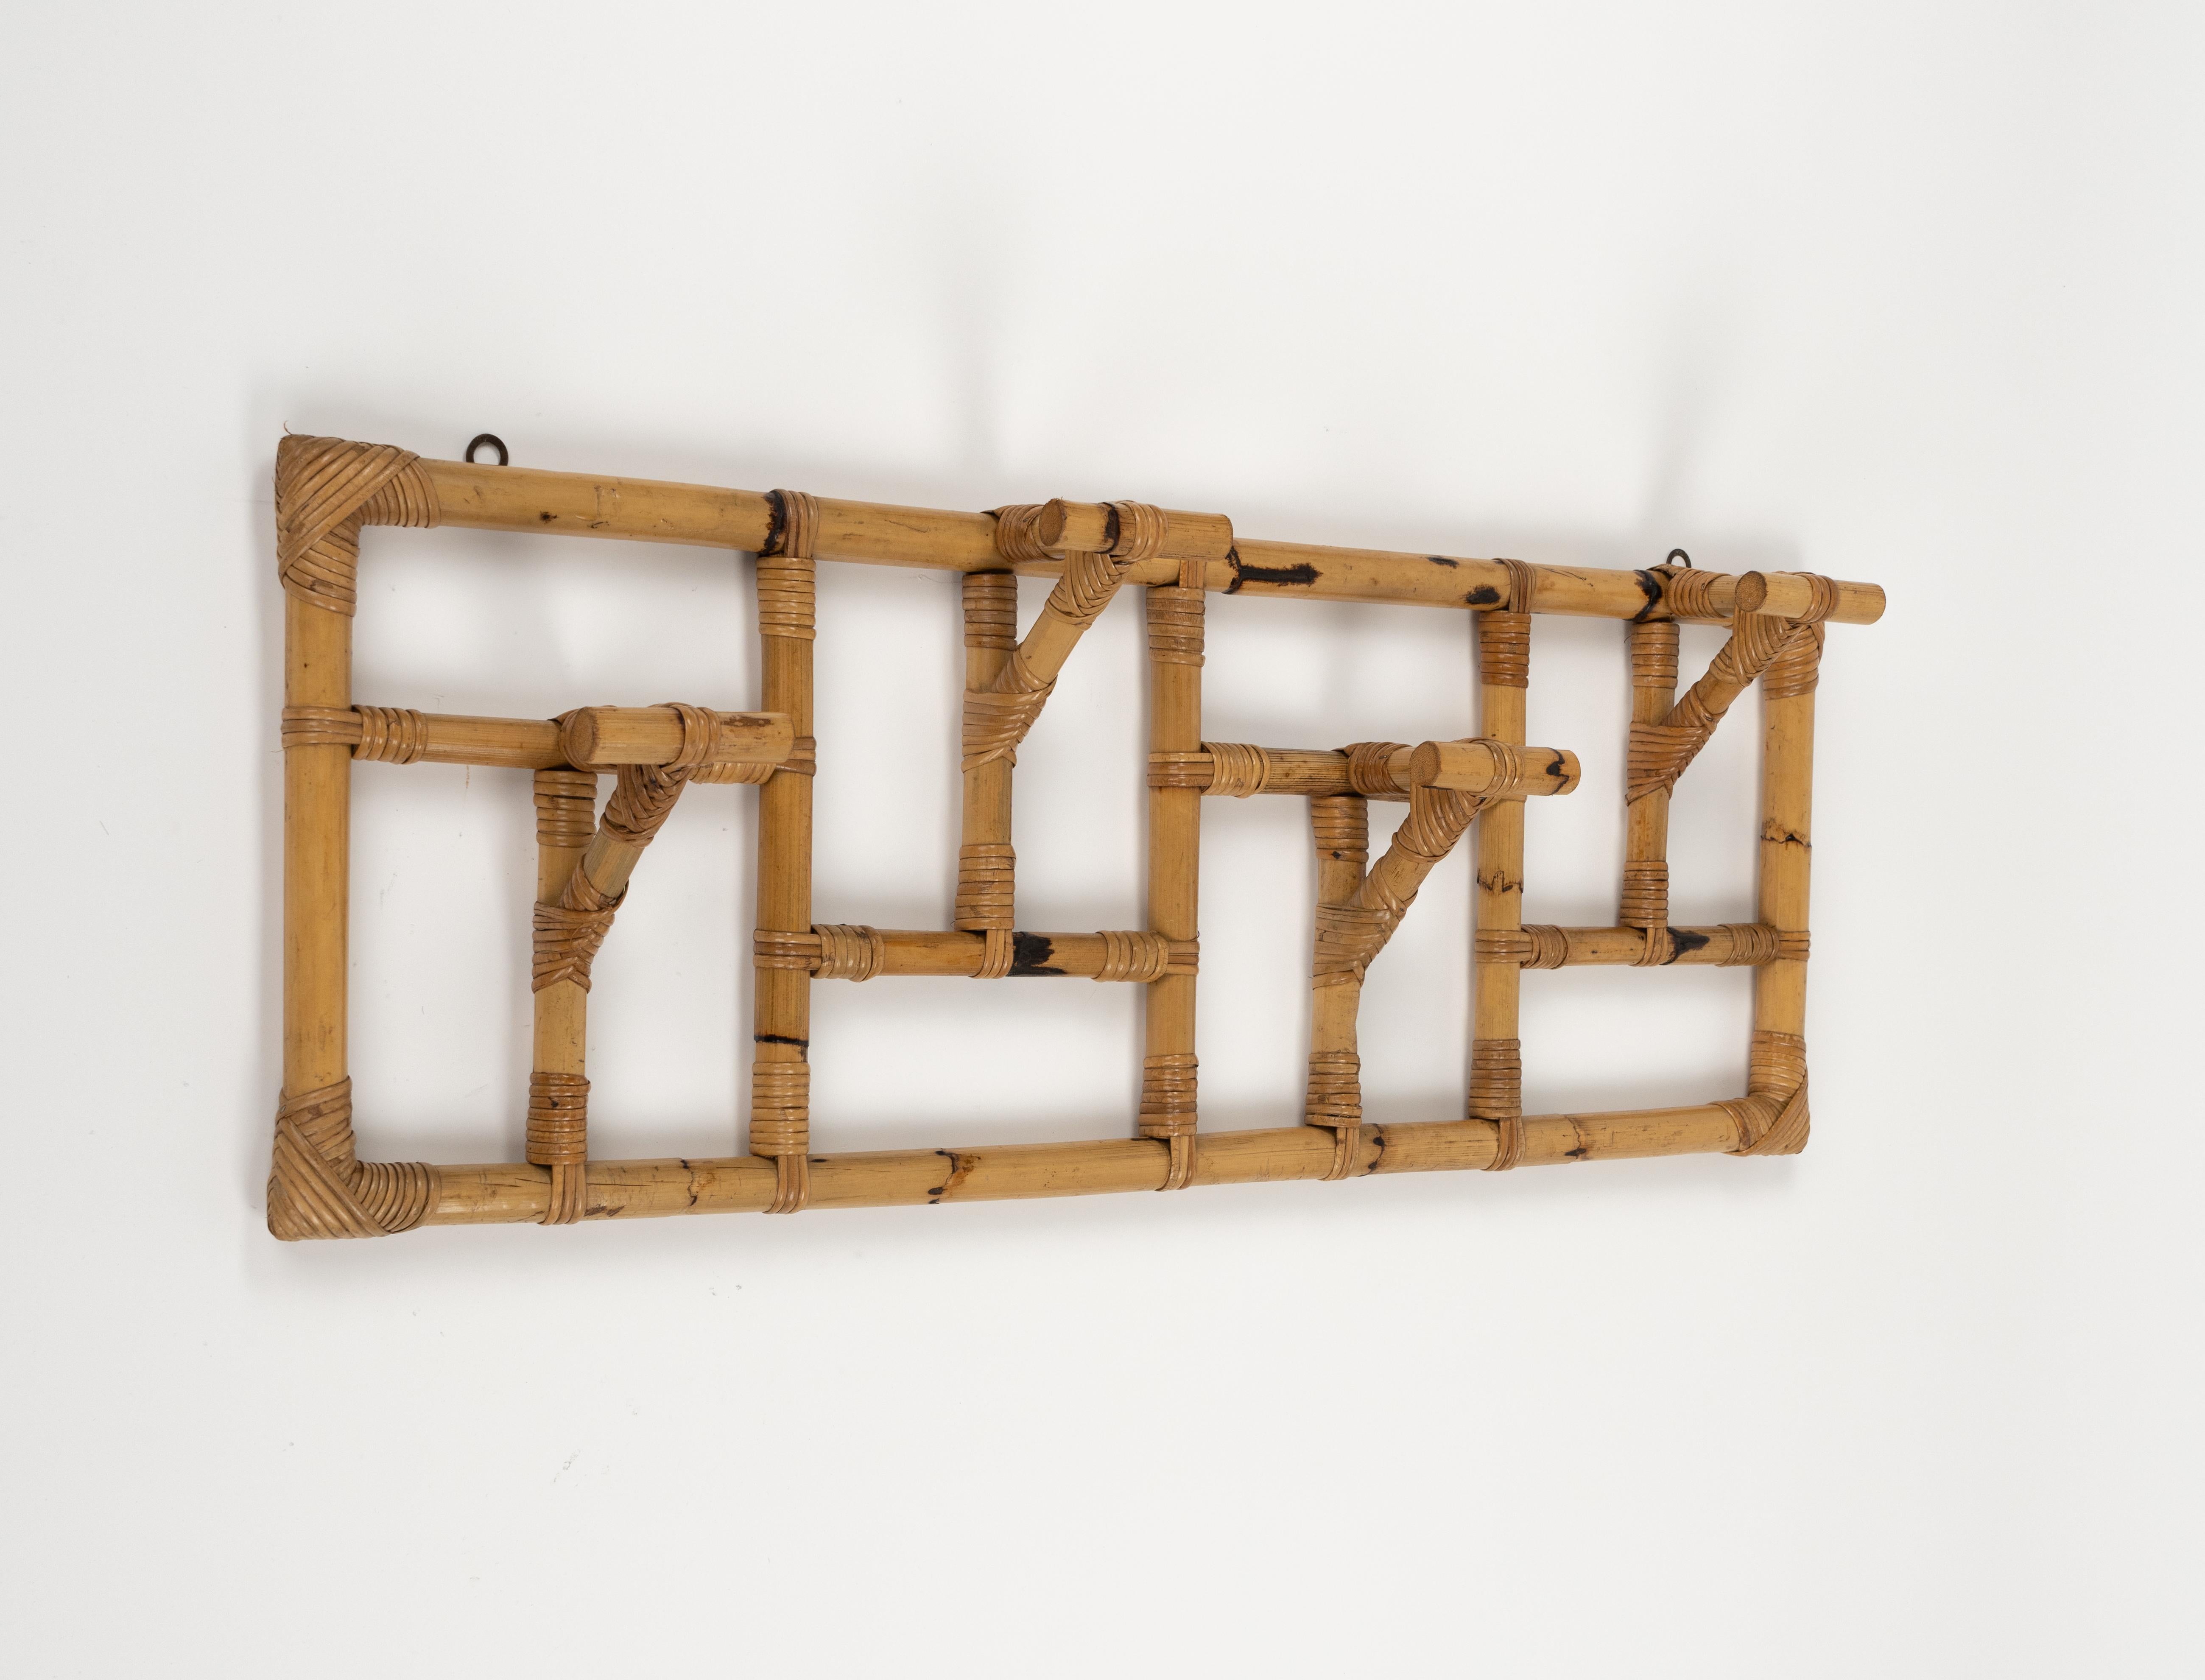 Italian Midcentury Wall Coat Rack in Bamboo and Rattan Vivai Del Sud Style, Italy 1970s